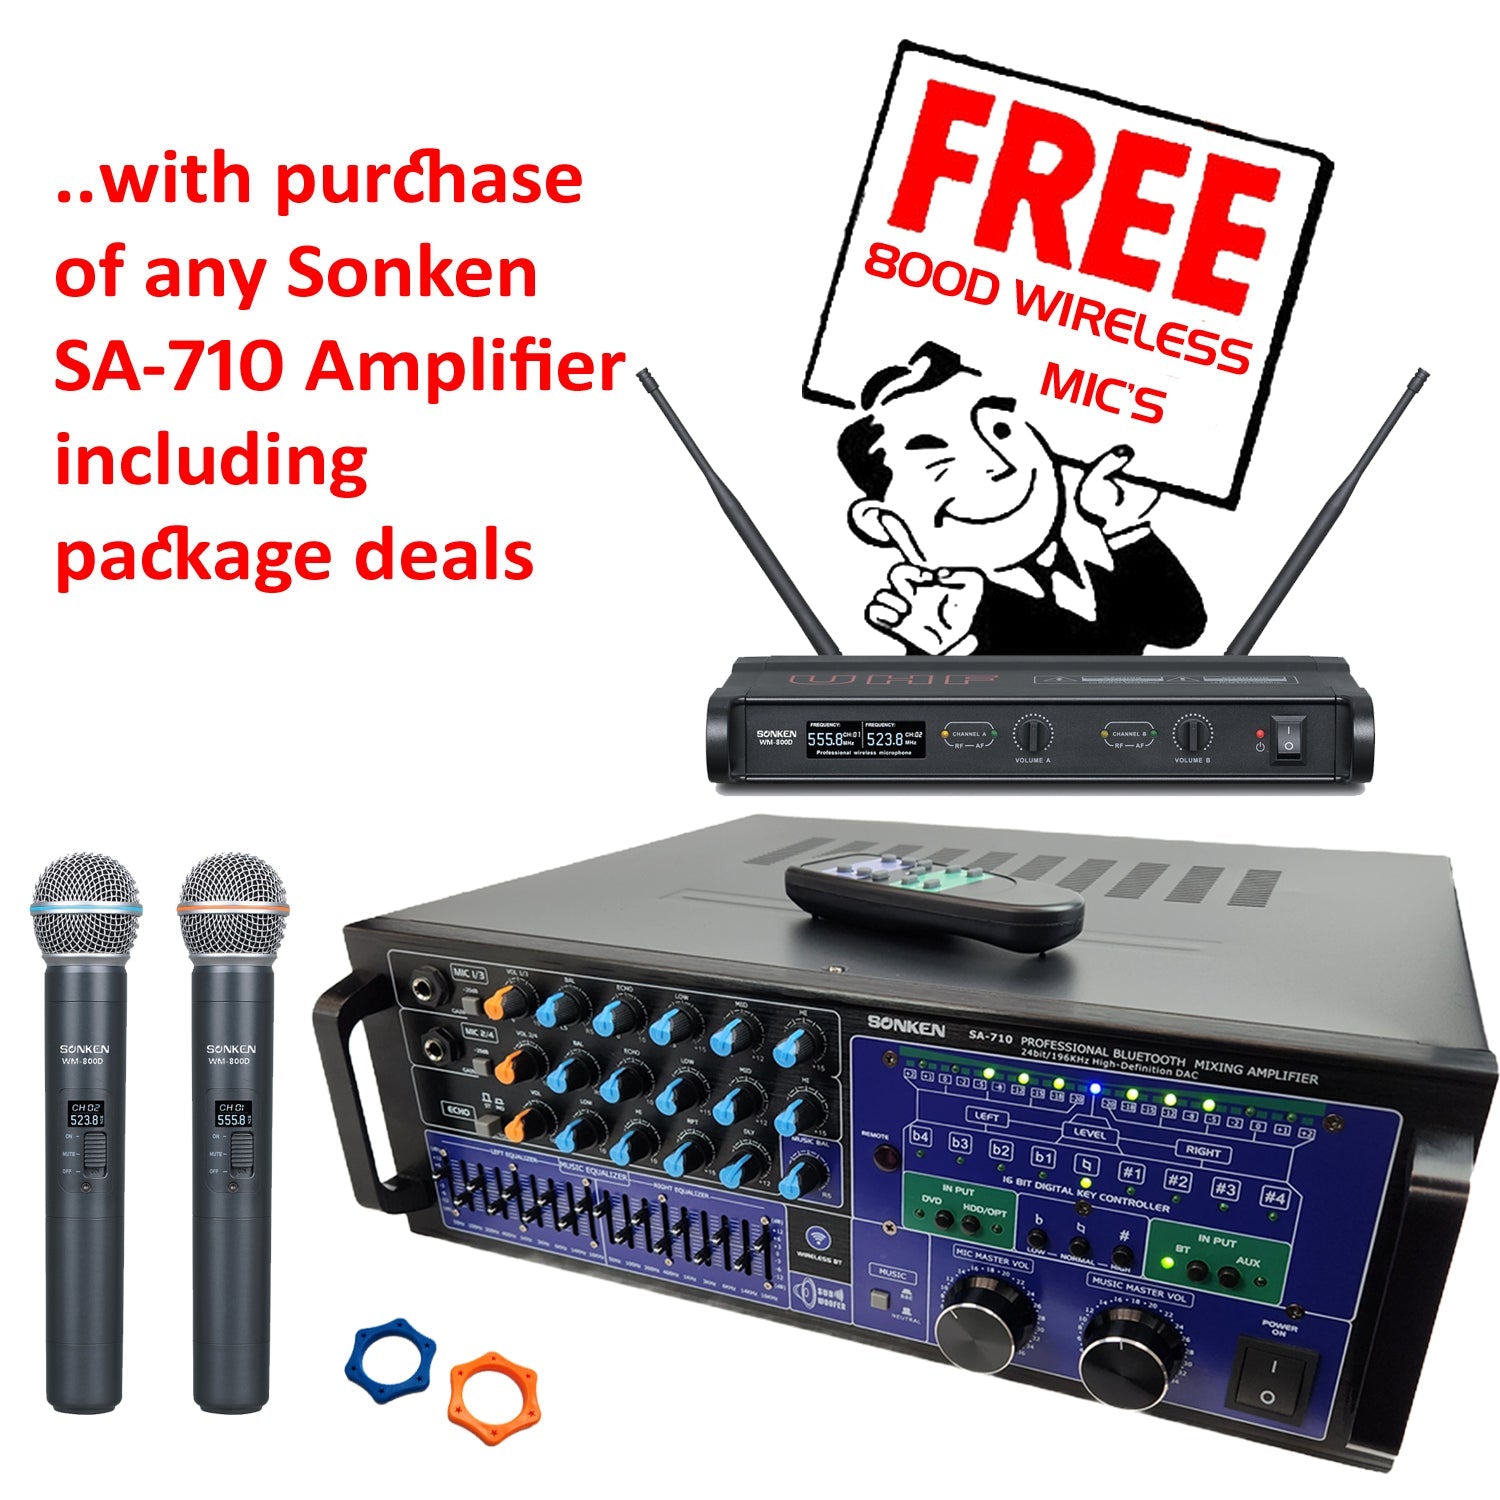 Free Wireless Microphones with purchase of Sonken SA-710 Mixing Amplifier - Karaoke Home Entertainment